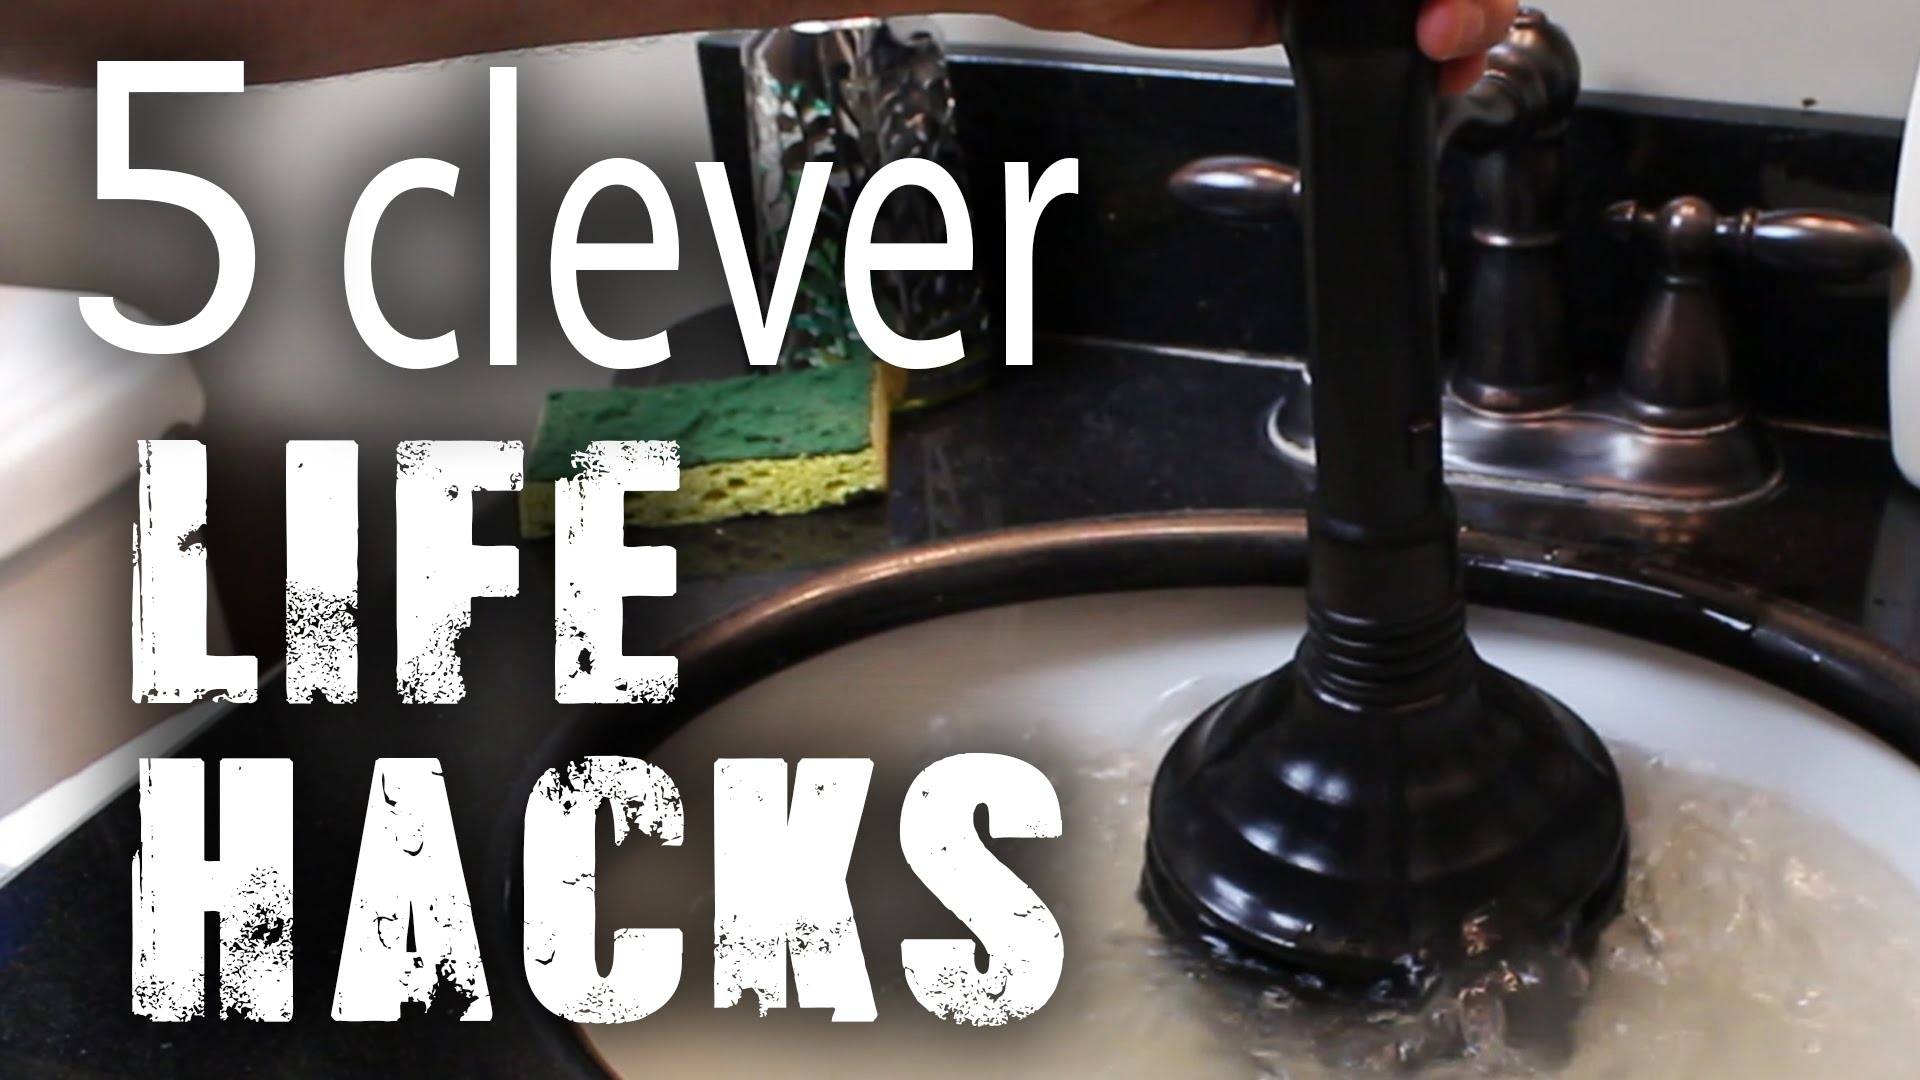 5 Clever Lifehacks that will Easily Solve Household Problems